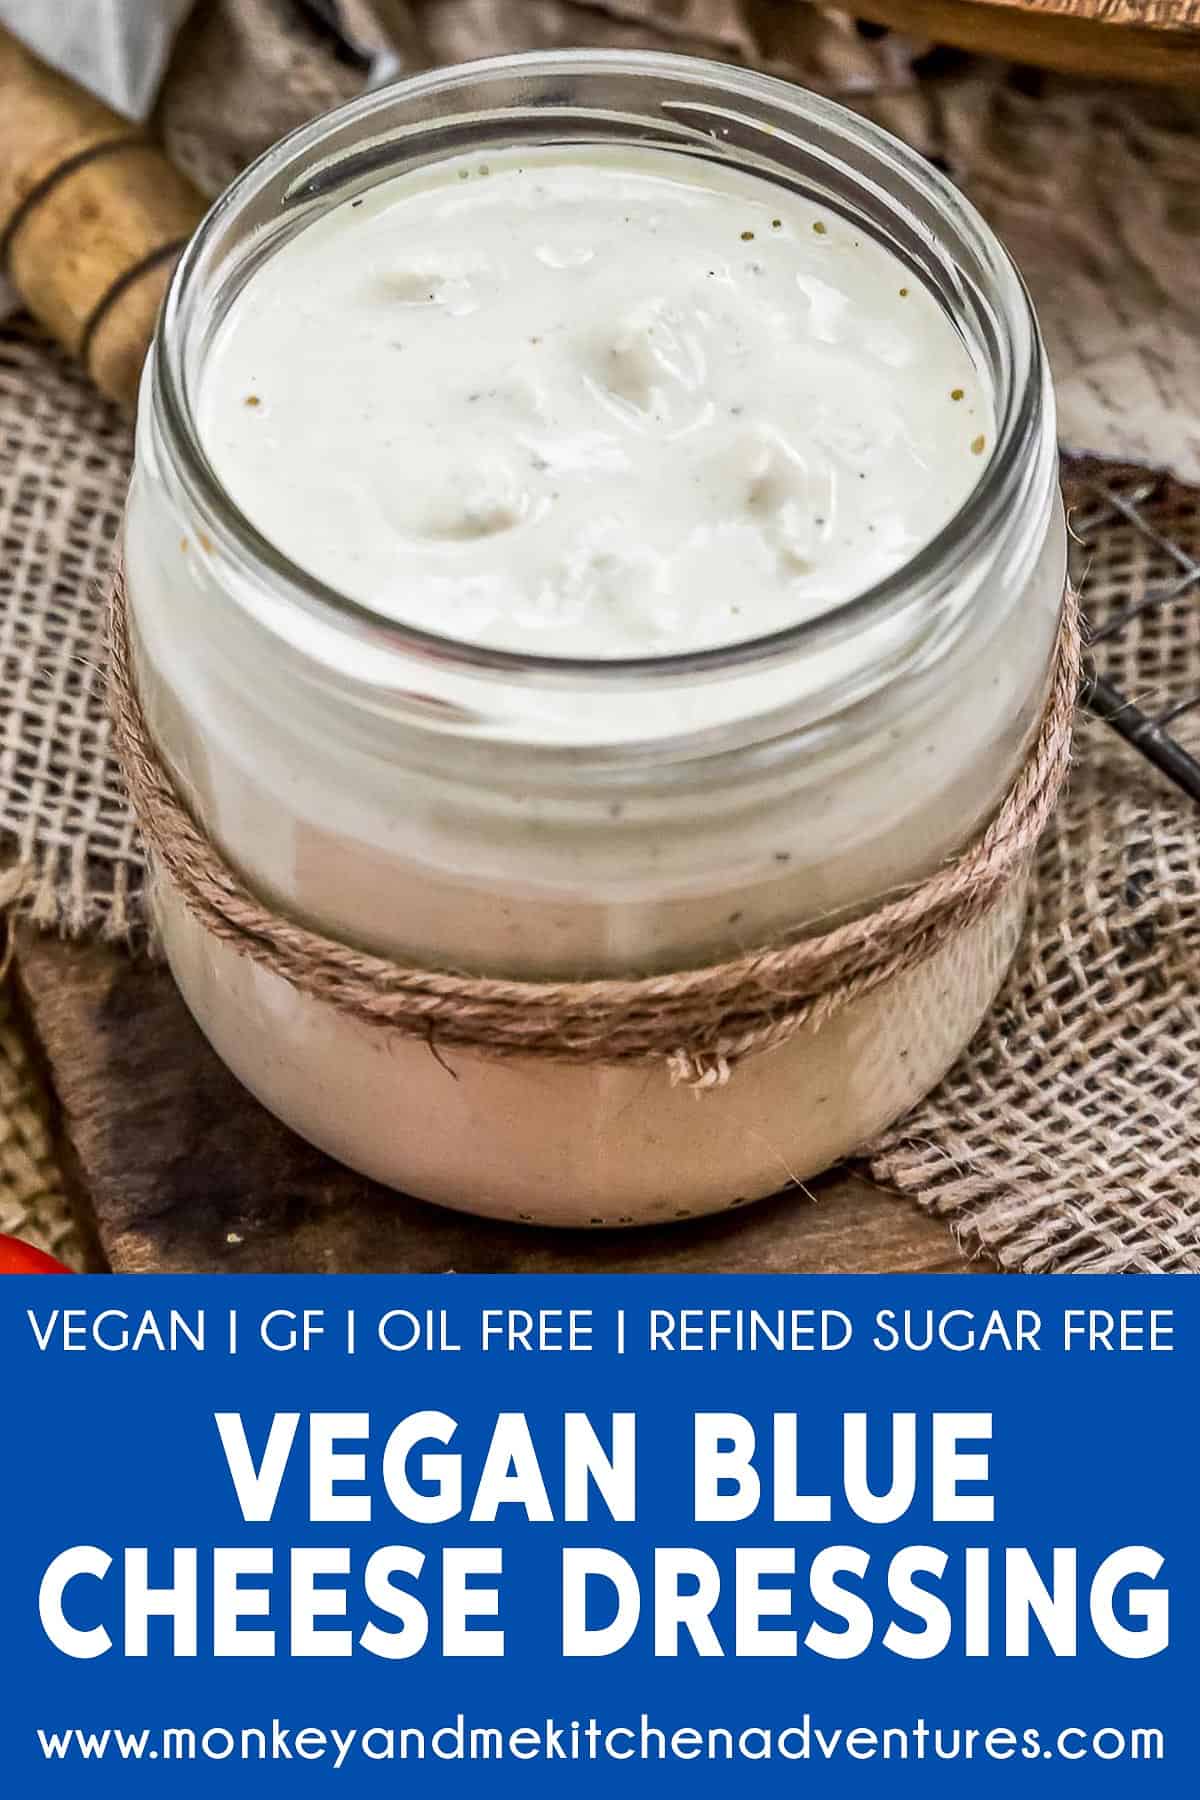 Vegan Blue Cheese Dressing with text description